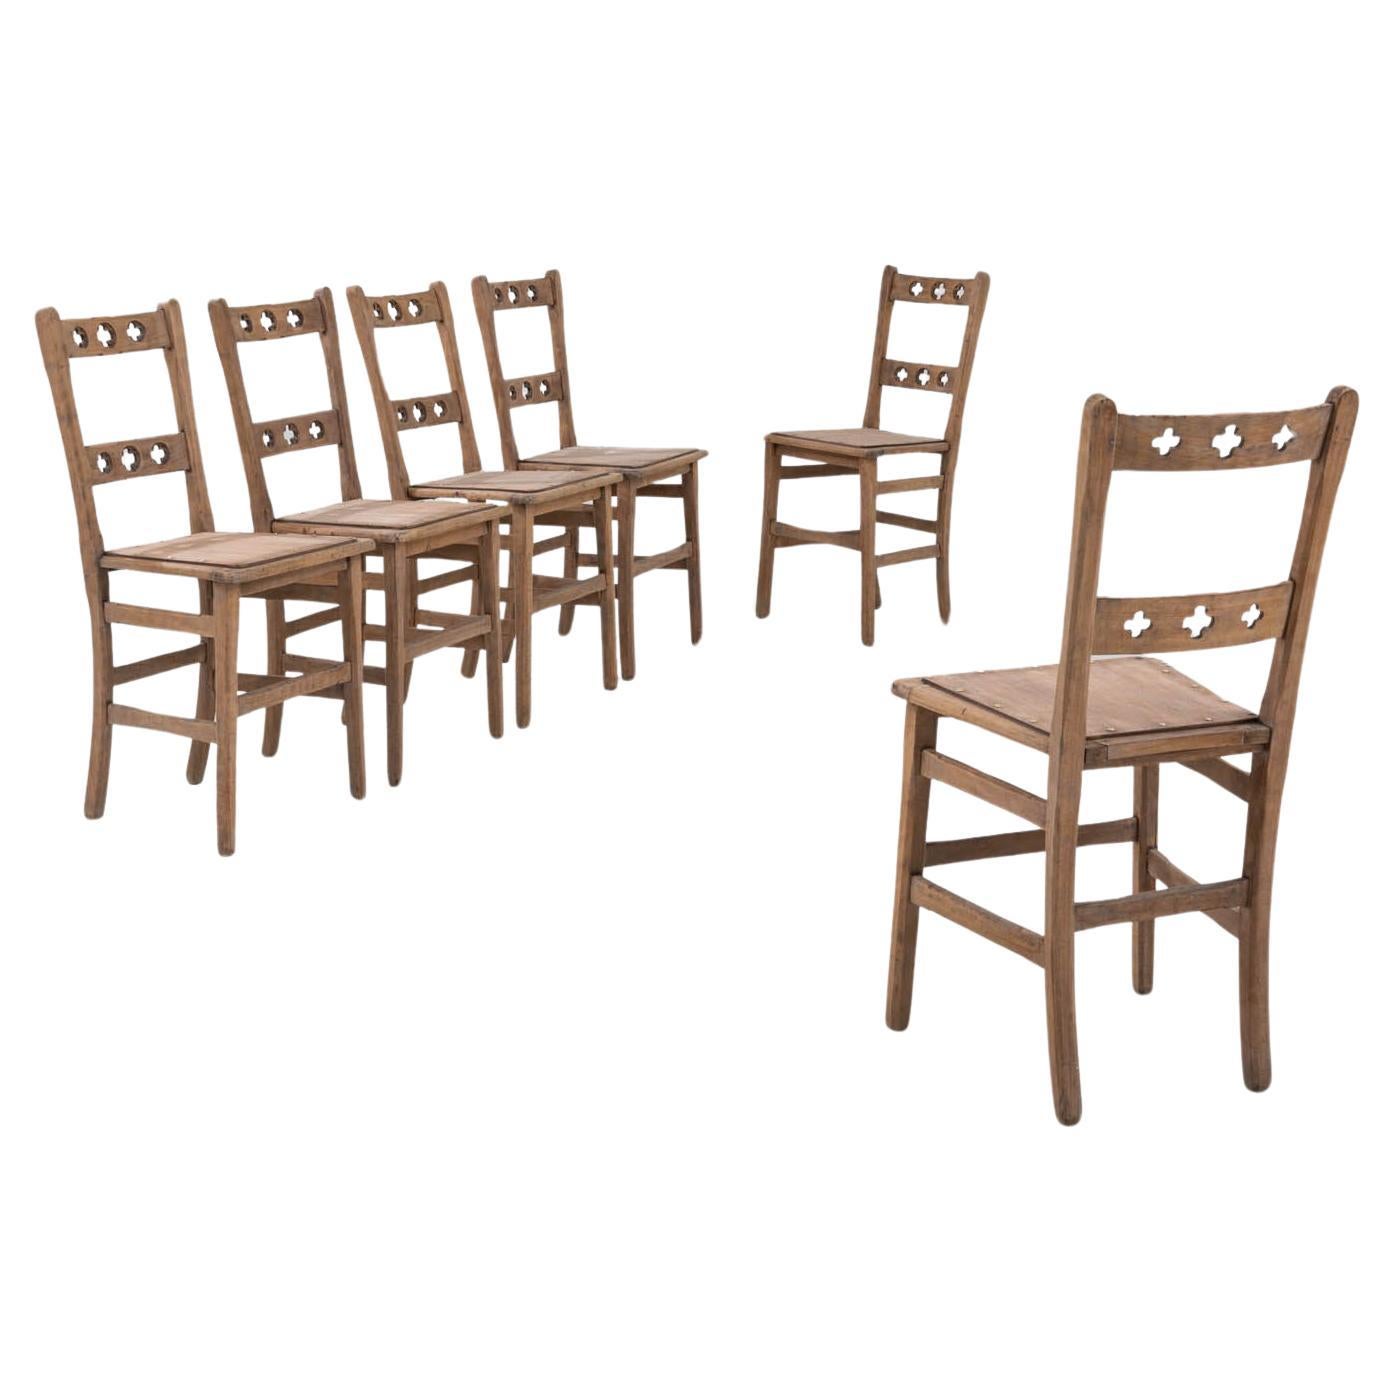 1910s French Set Of 6 Wooden Dining Chairs